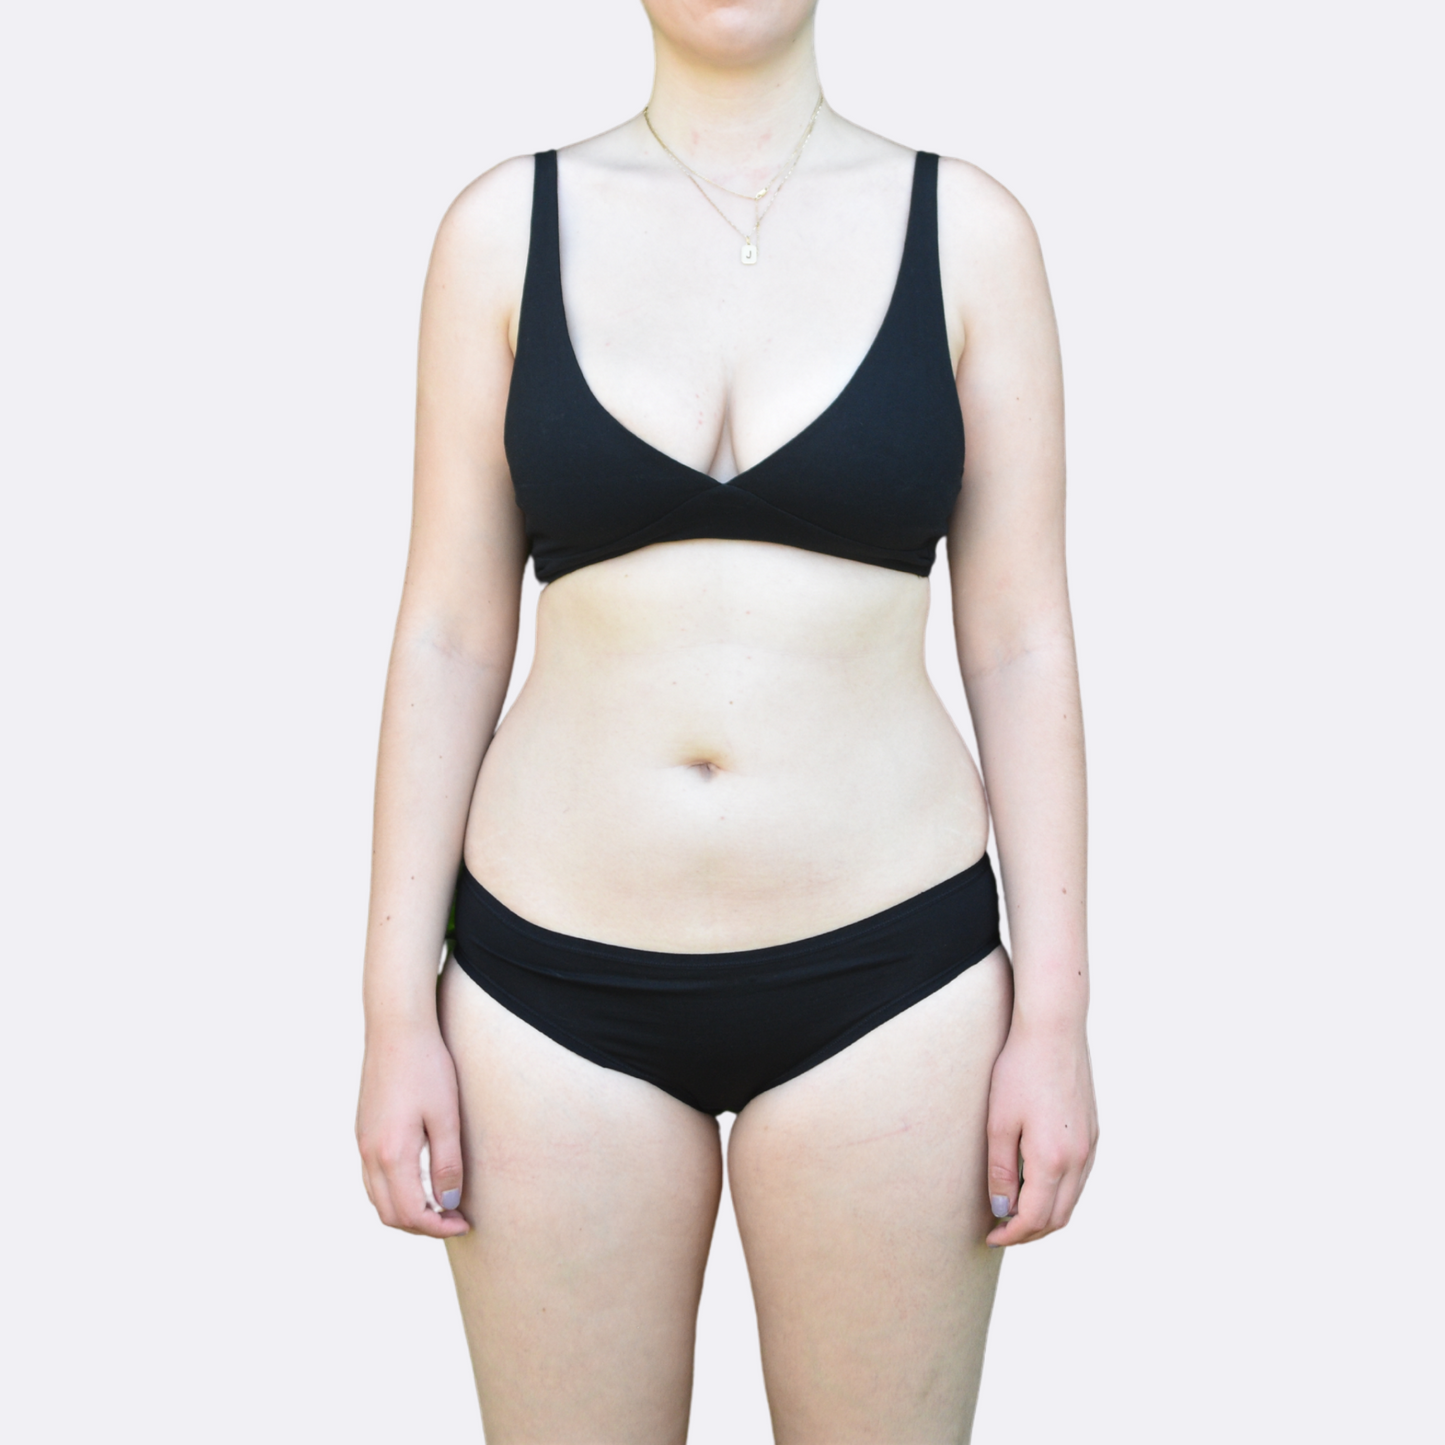 A light skinned woman wears the organic cotton Black bralette and bikini set facing the front